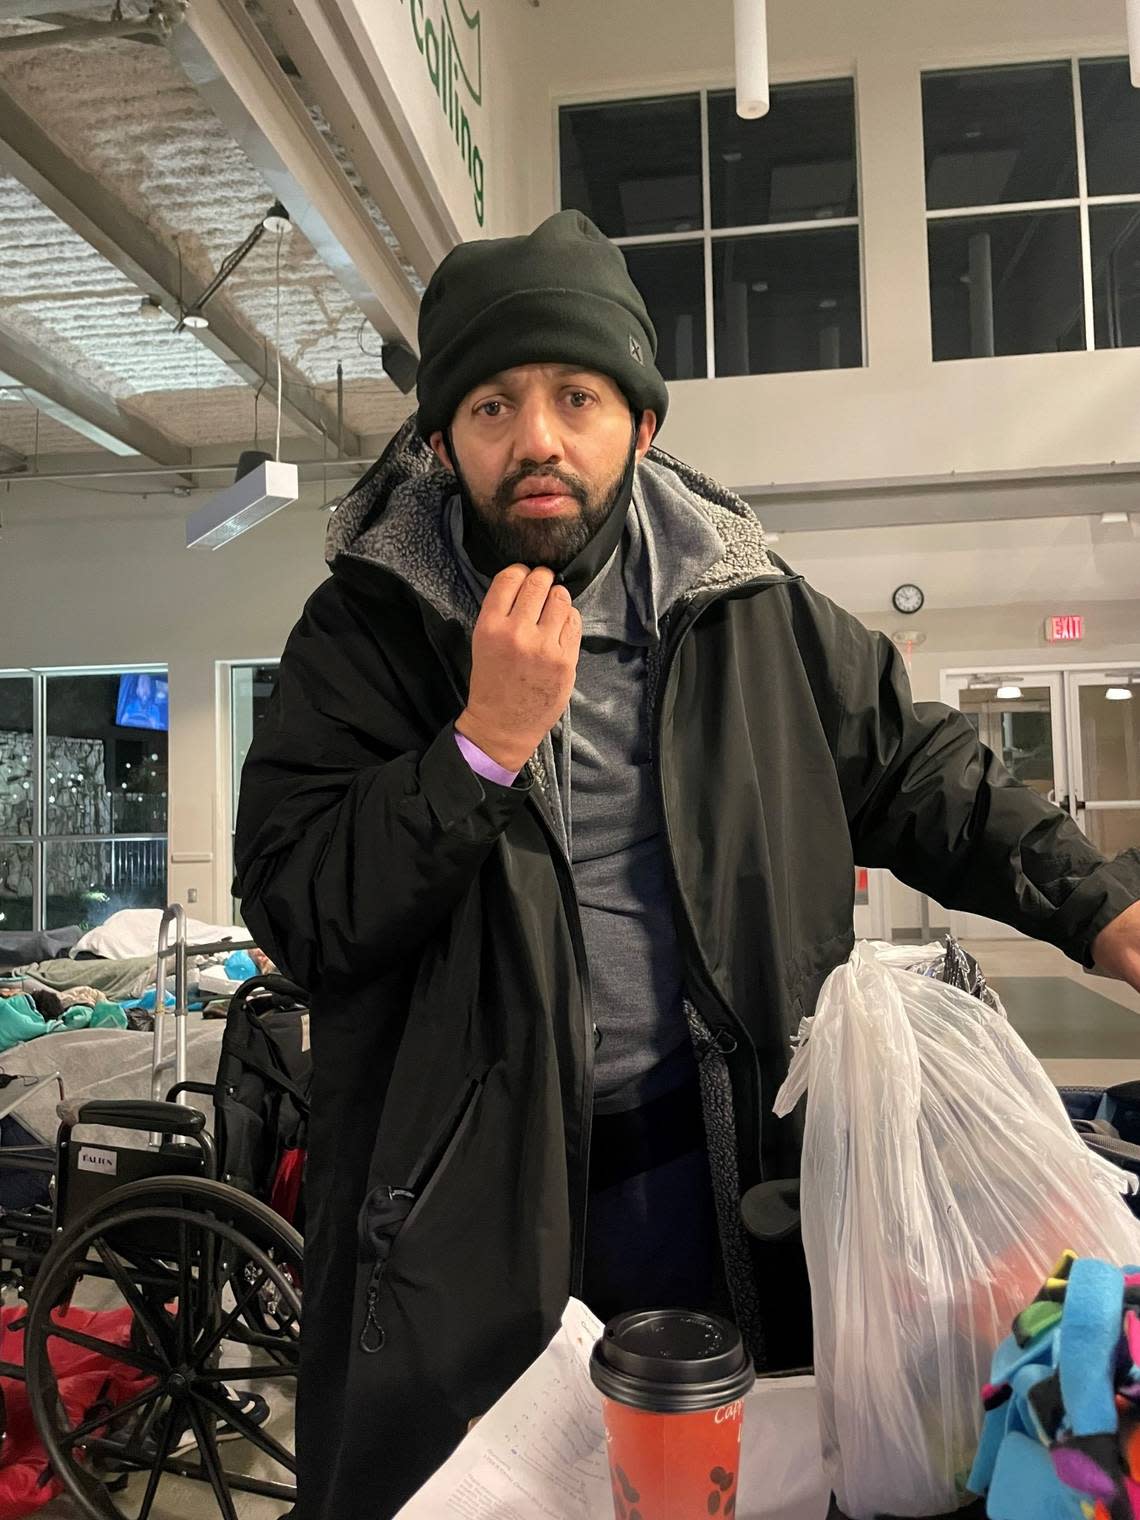 Malik Faisal Akram is seen checking in to OurCalling in Dallas the night of Jan. 2 when the center opened its door for emergency shelter in inclement weather.